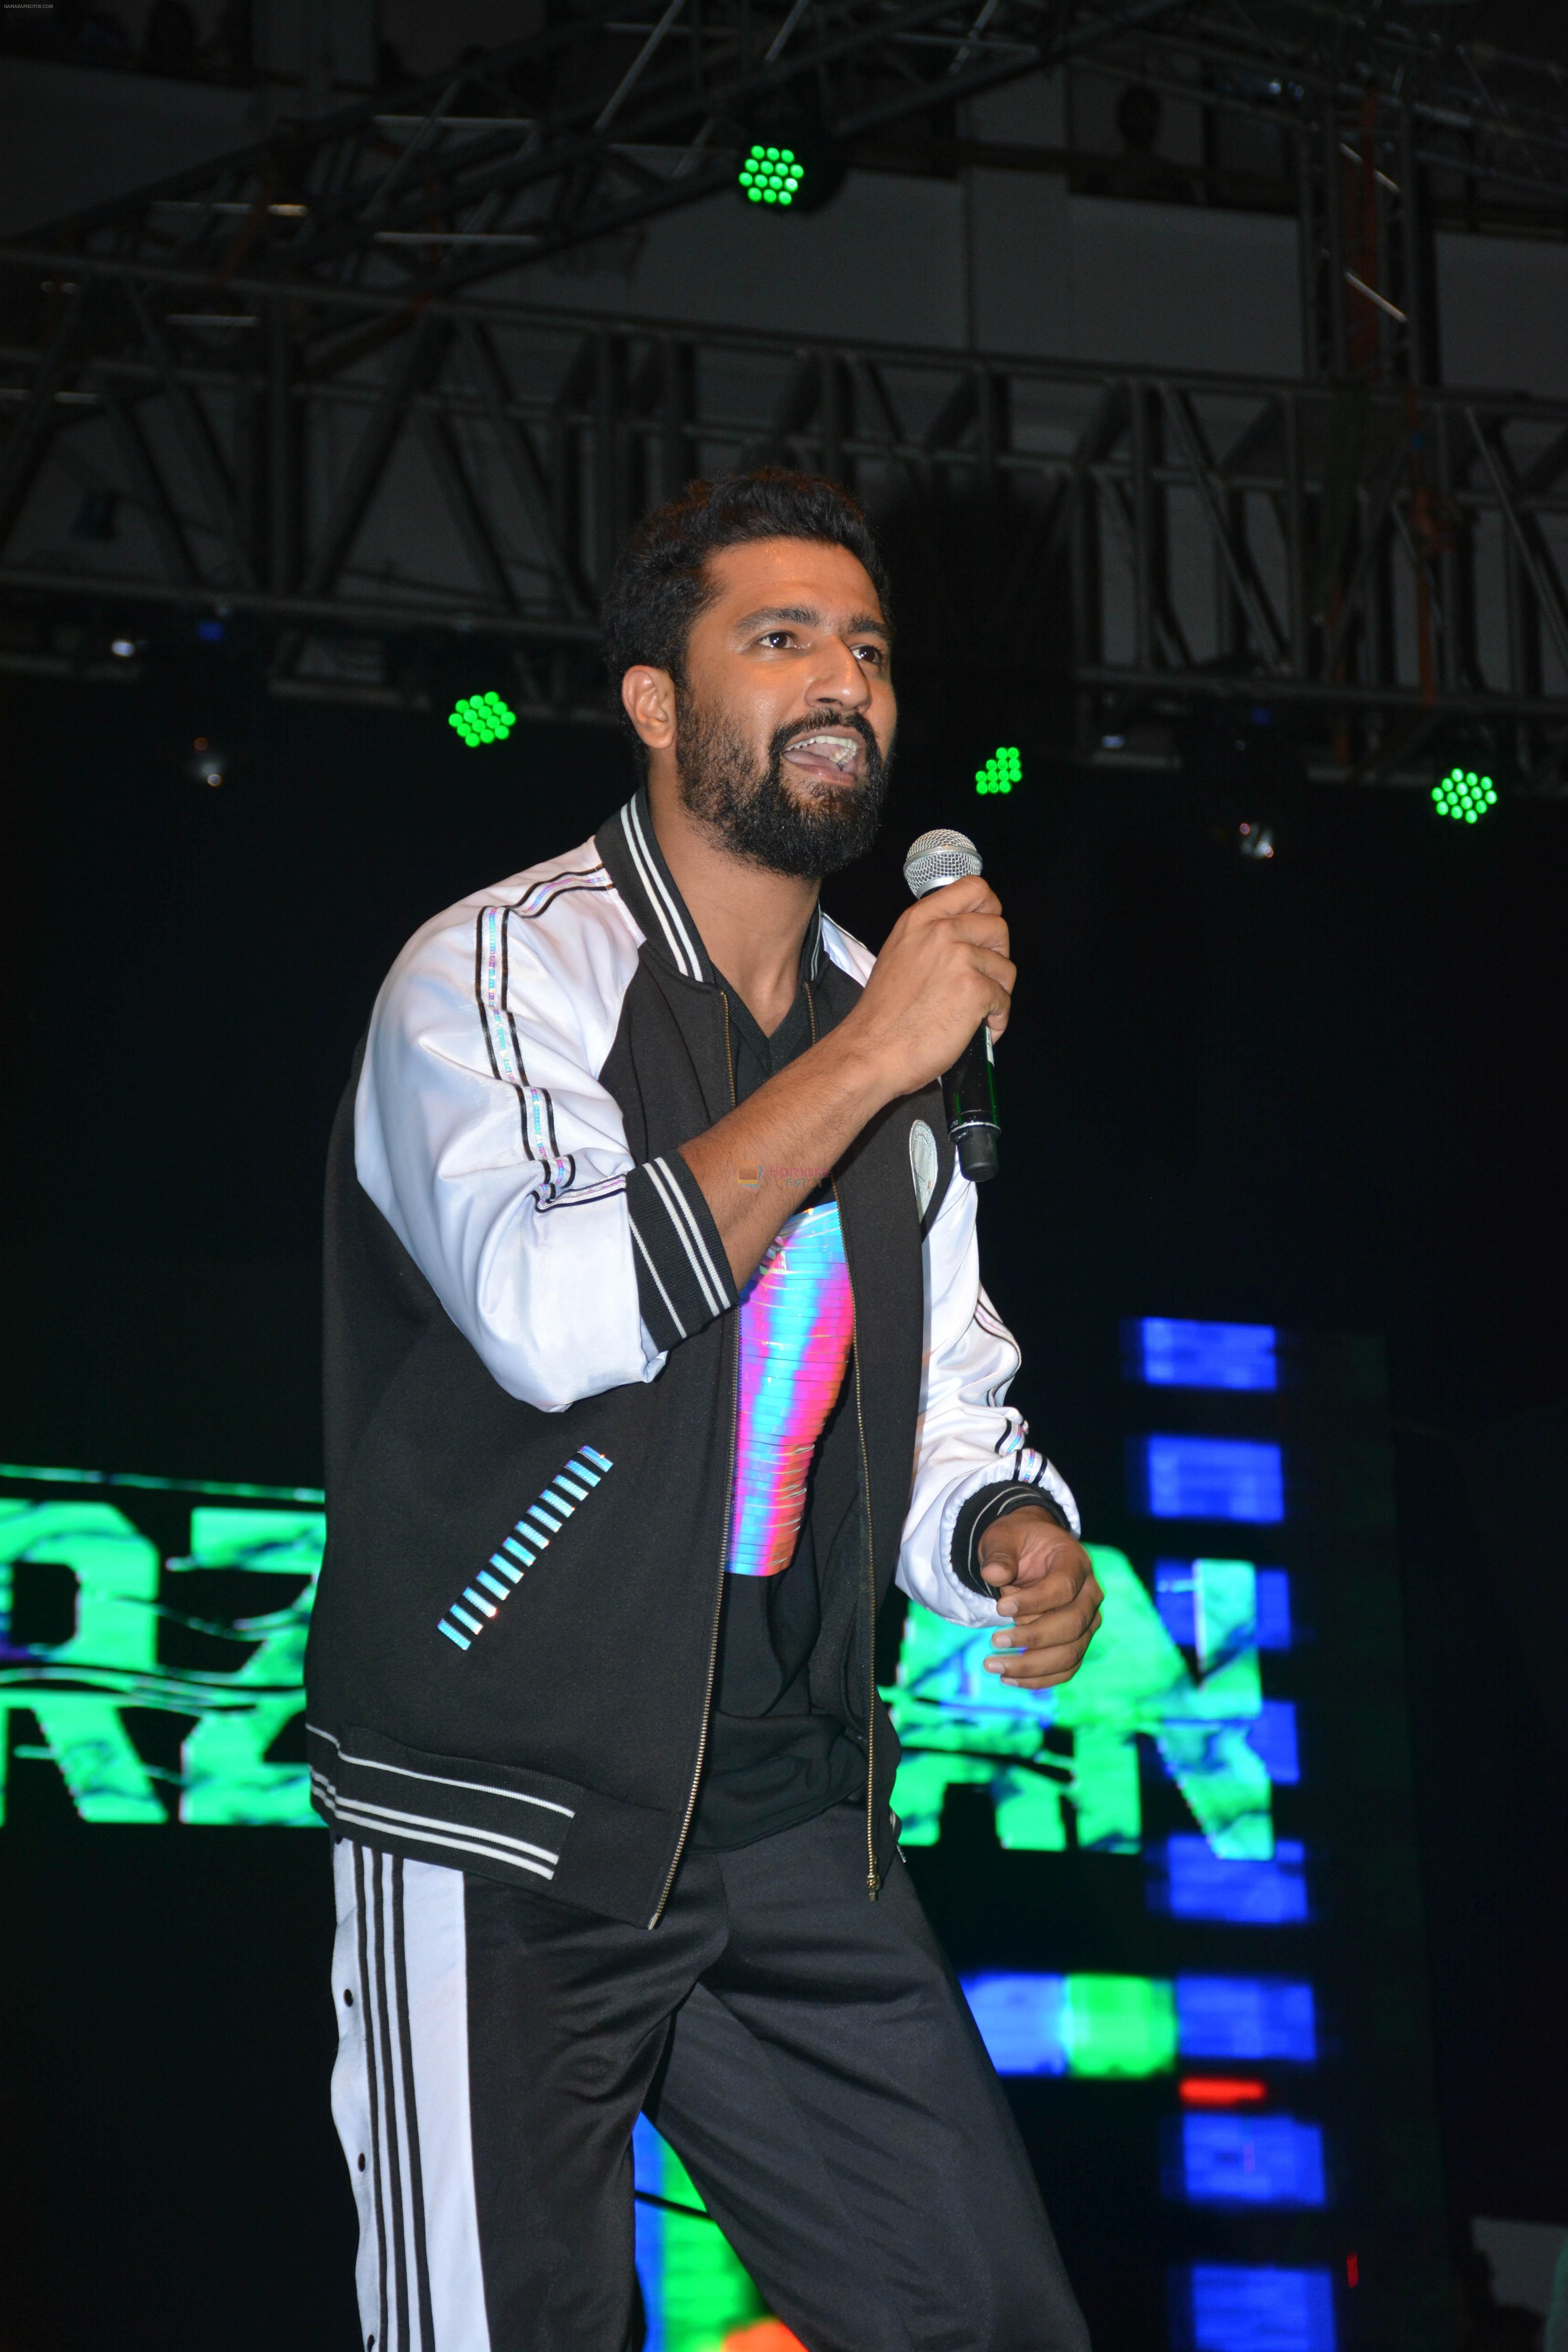 Vicky Kaushal at Manmarziyaan Music Concert in NM College In Juhu on 19th Aug 2018